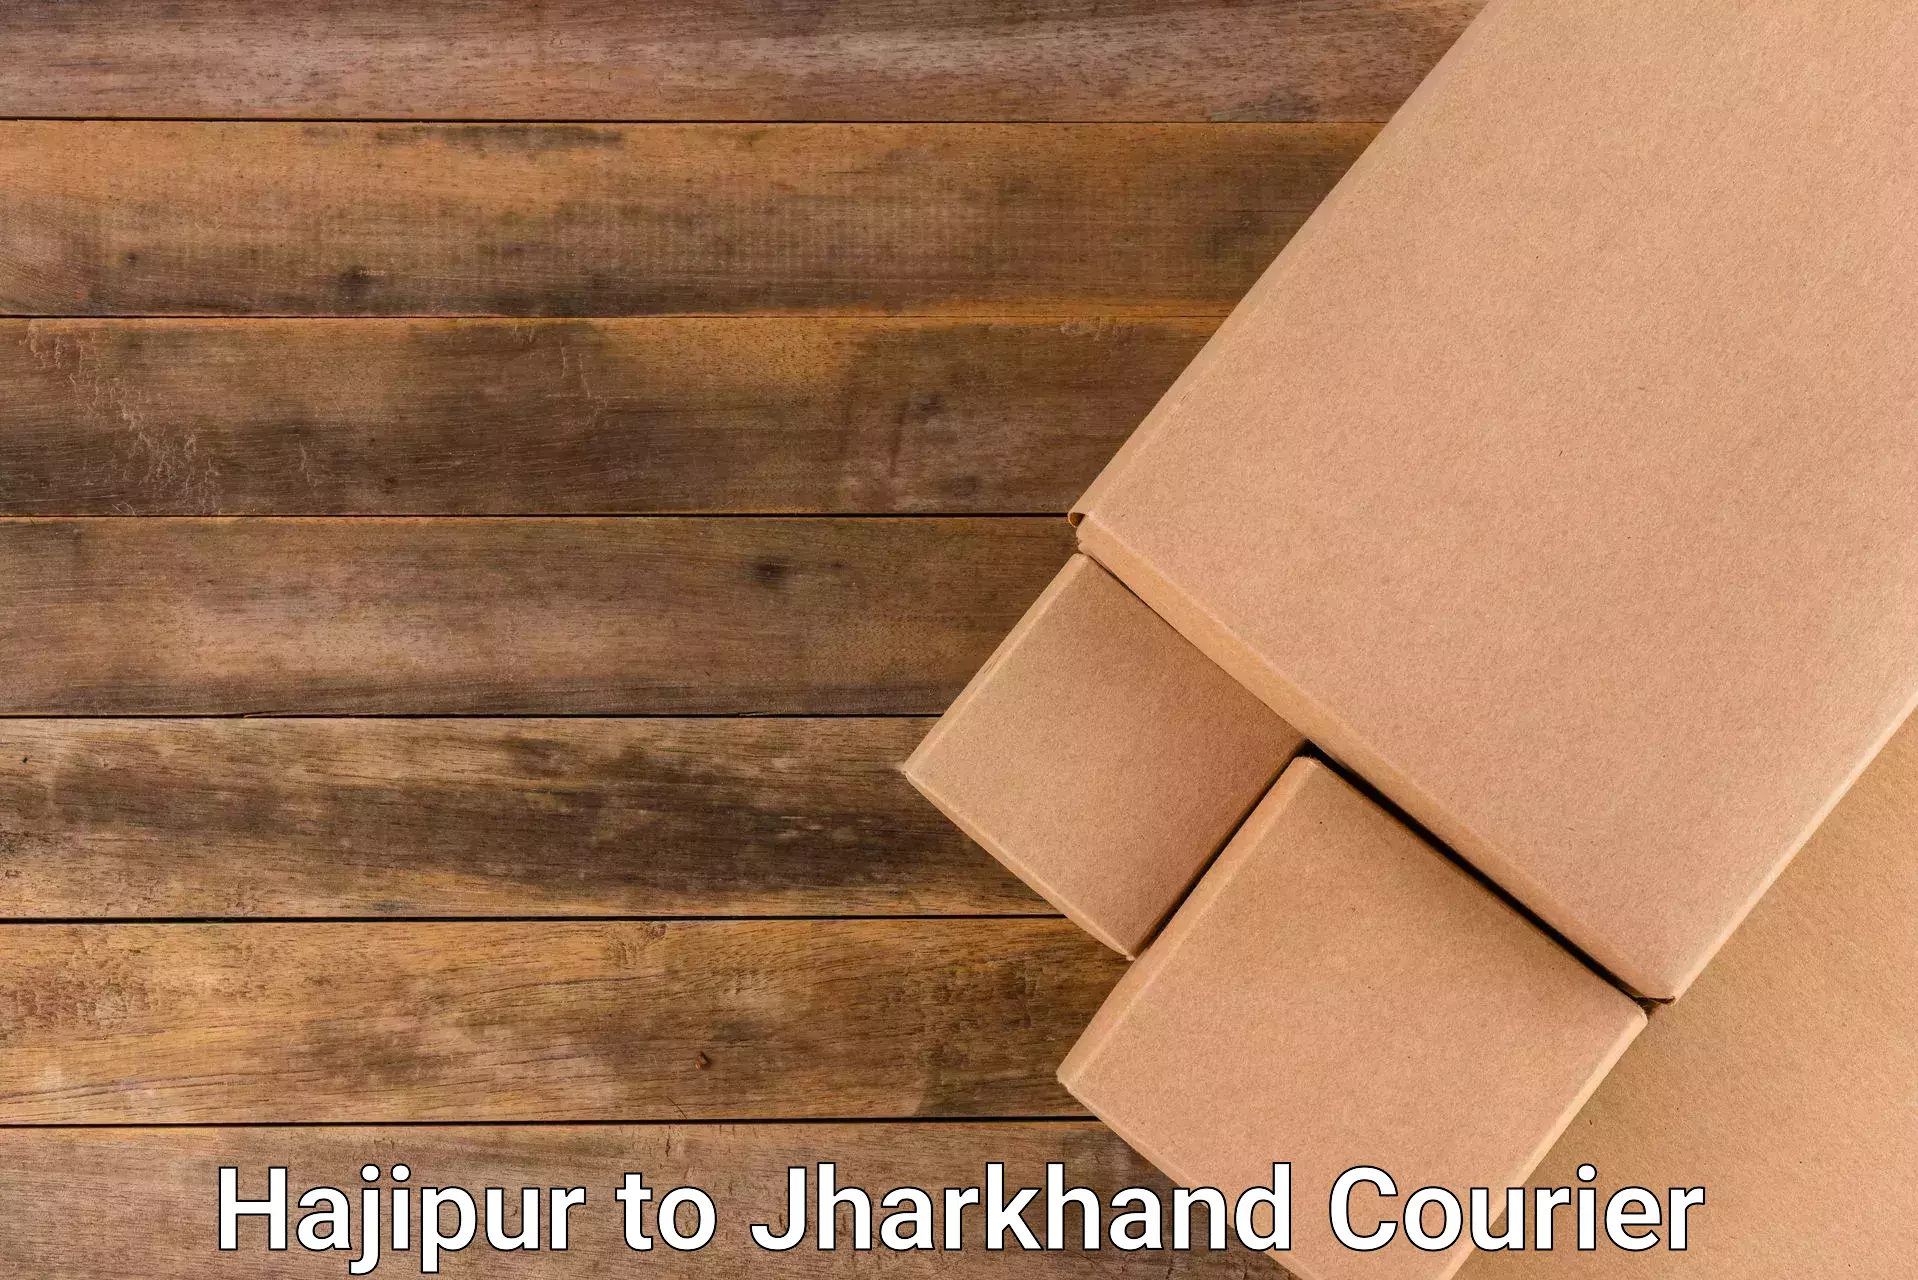 Multi-national courier services Hajipur to Bokaro Steel City